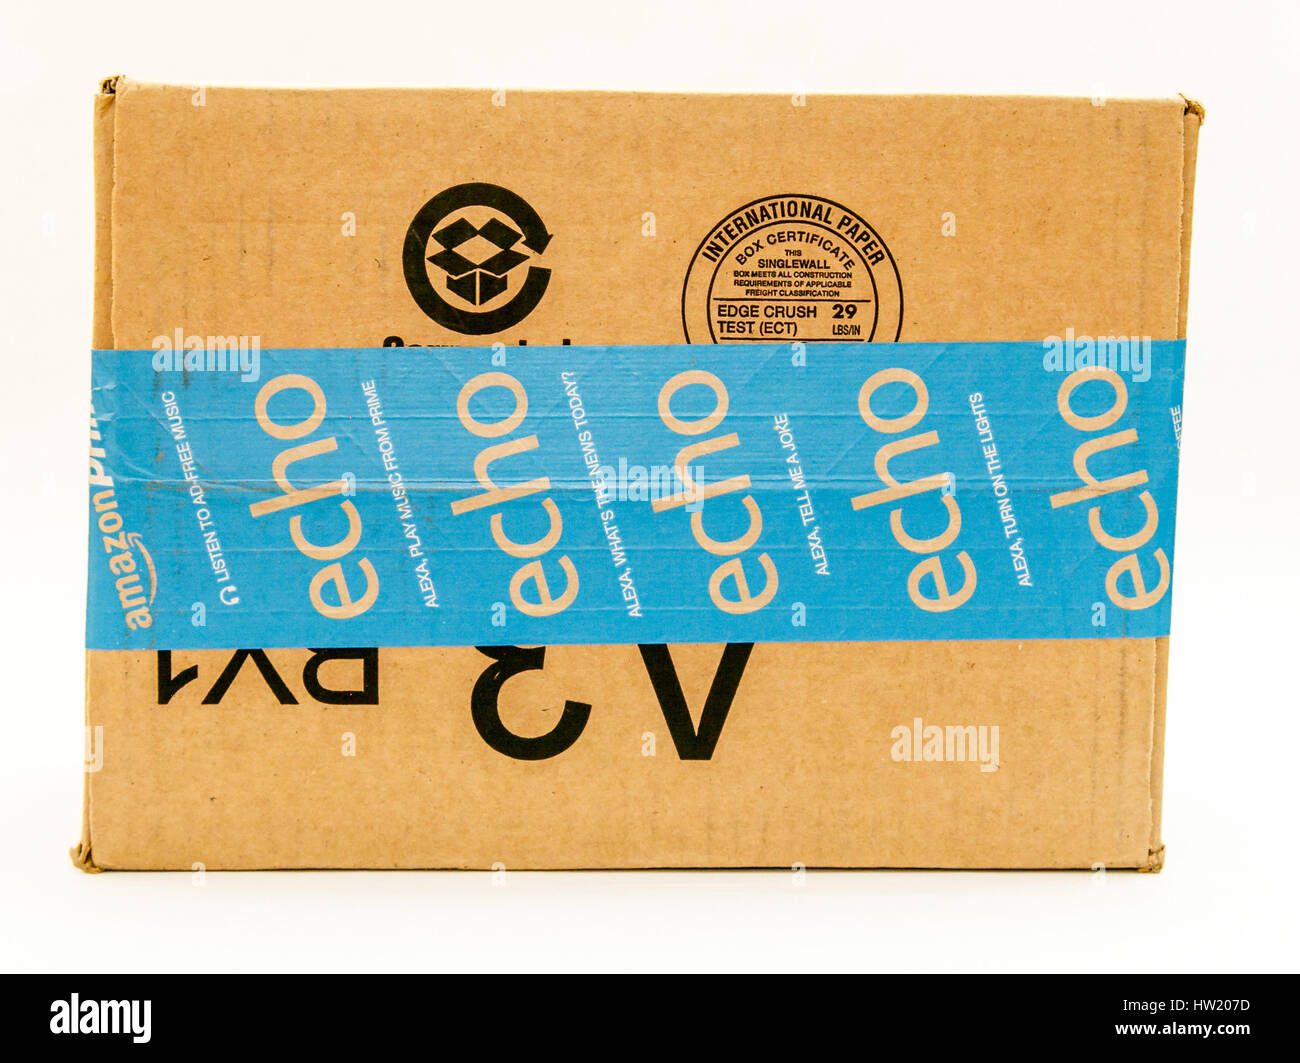 A cardboard shipping box from Amazon against white background. Stock Photo